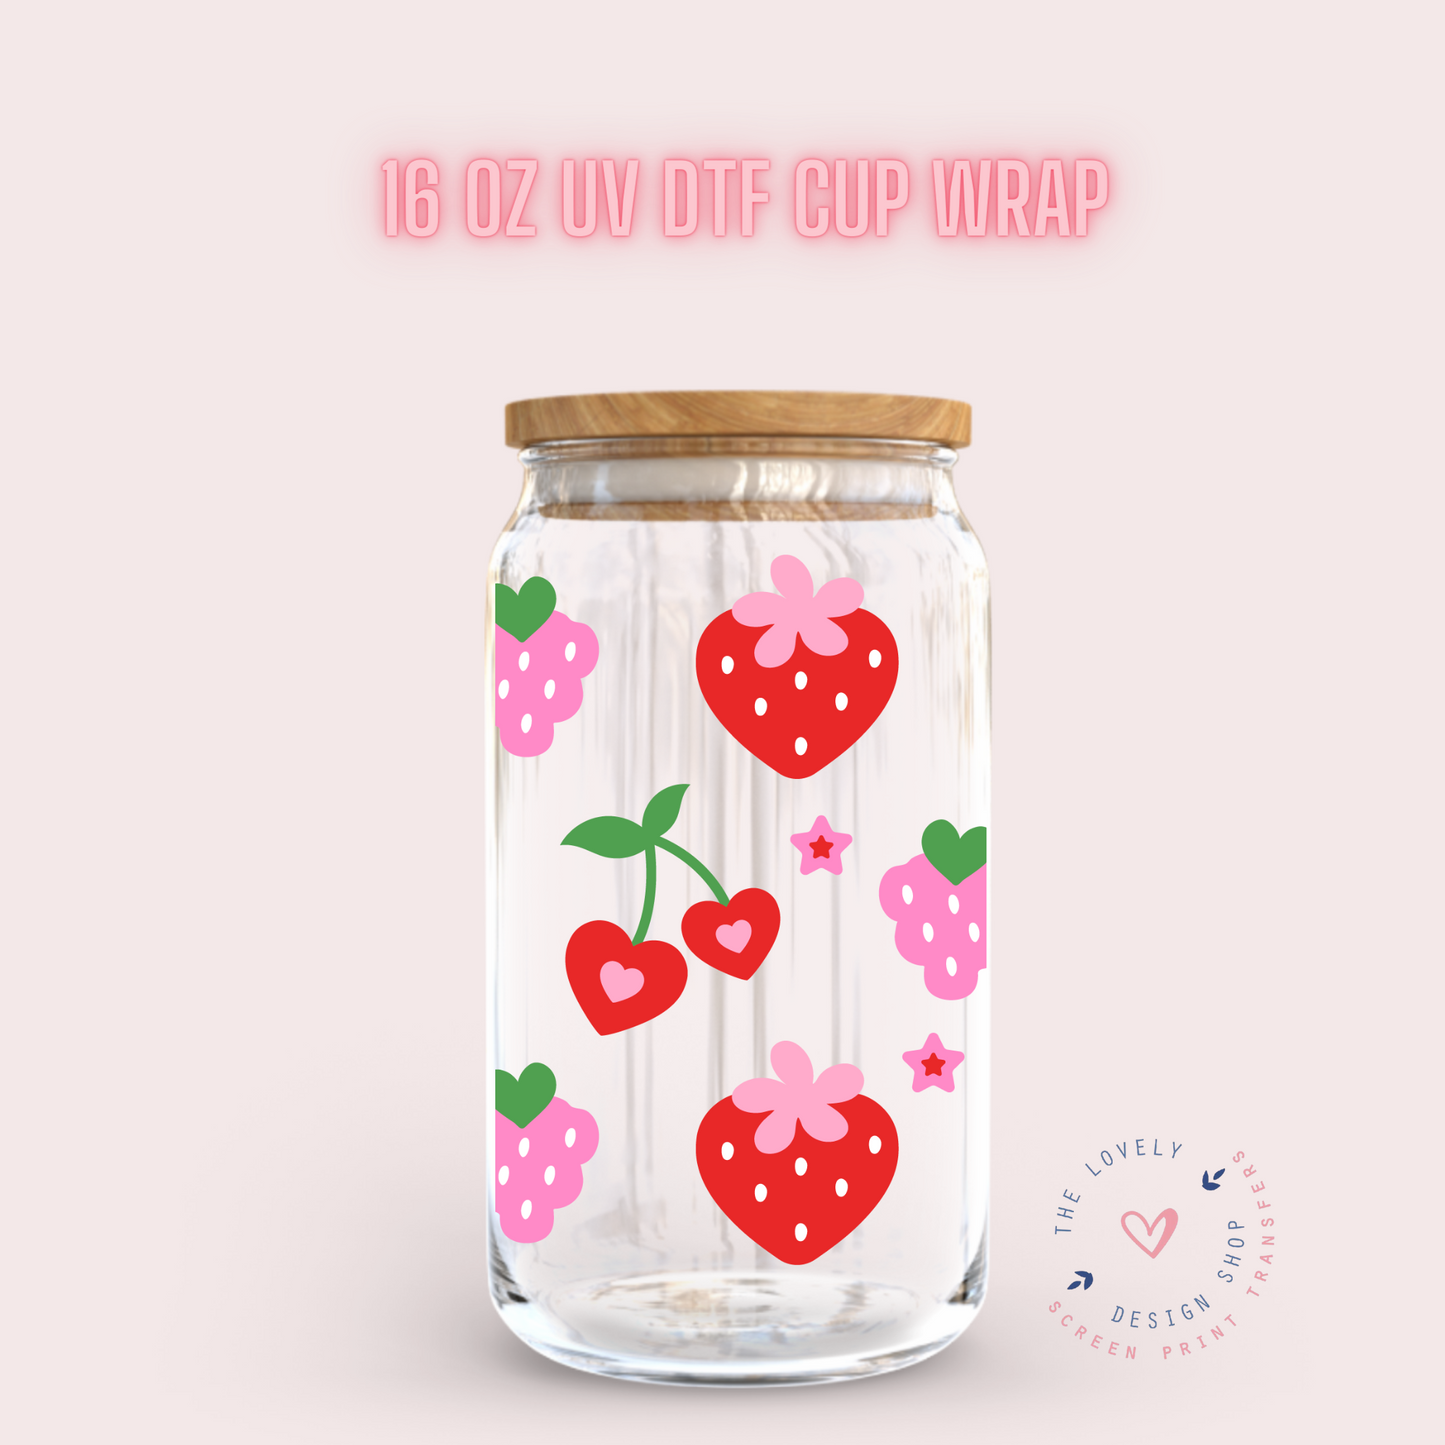 Berry Cuties - UV DTF 16 oz Libbey Cup Wrap (Ready to Ship) Feb 5